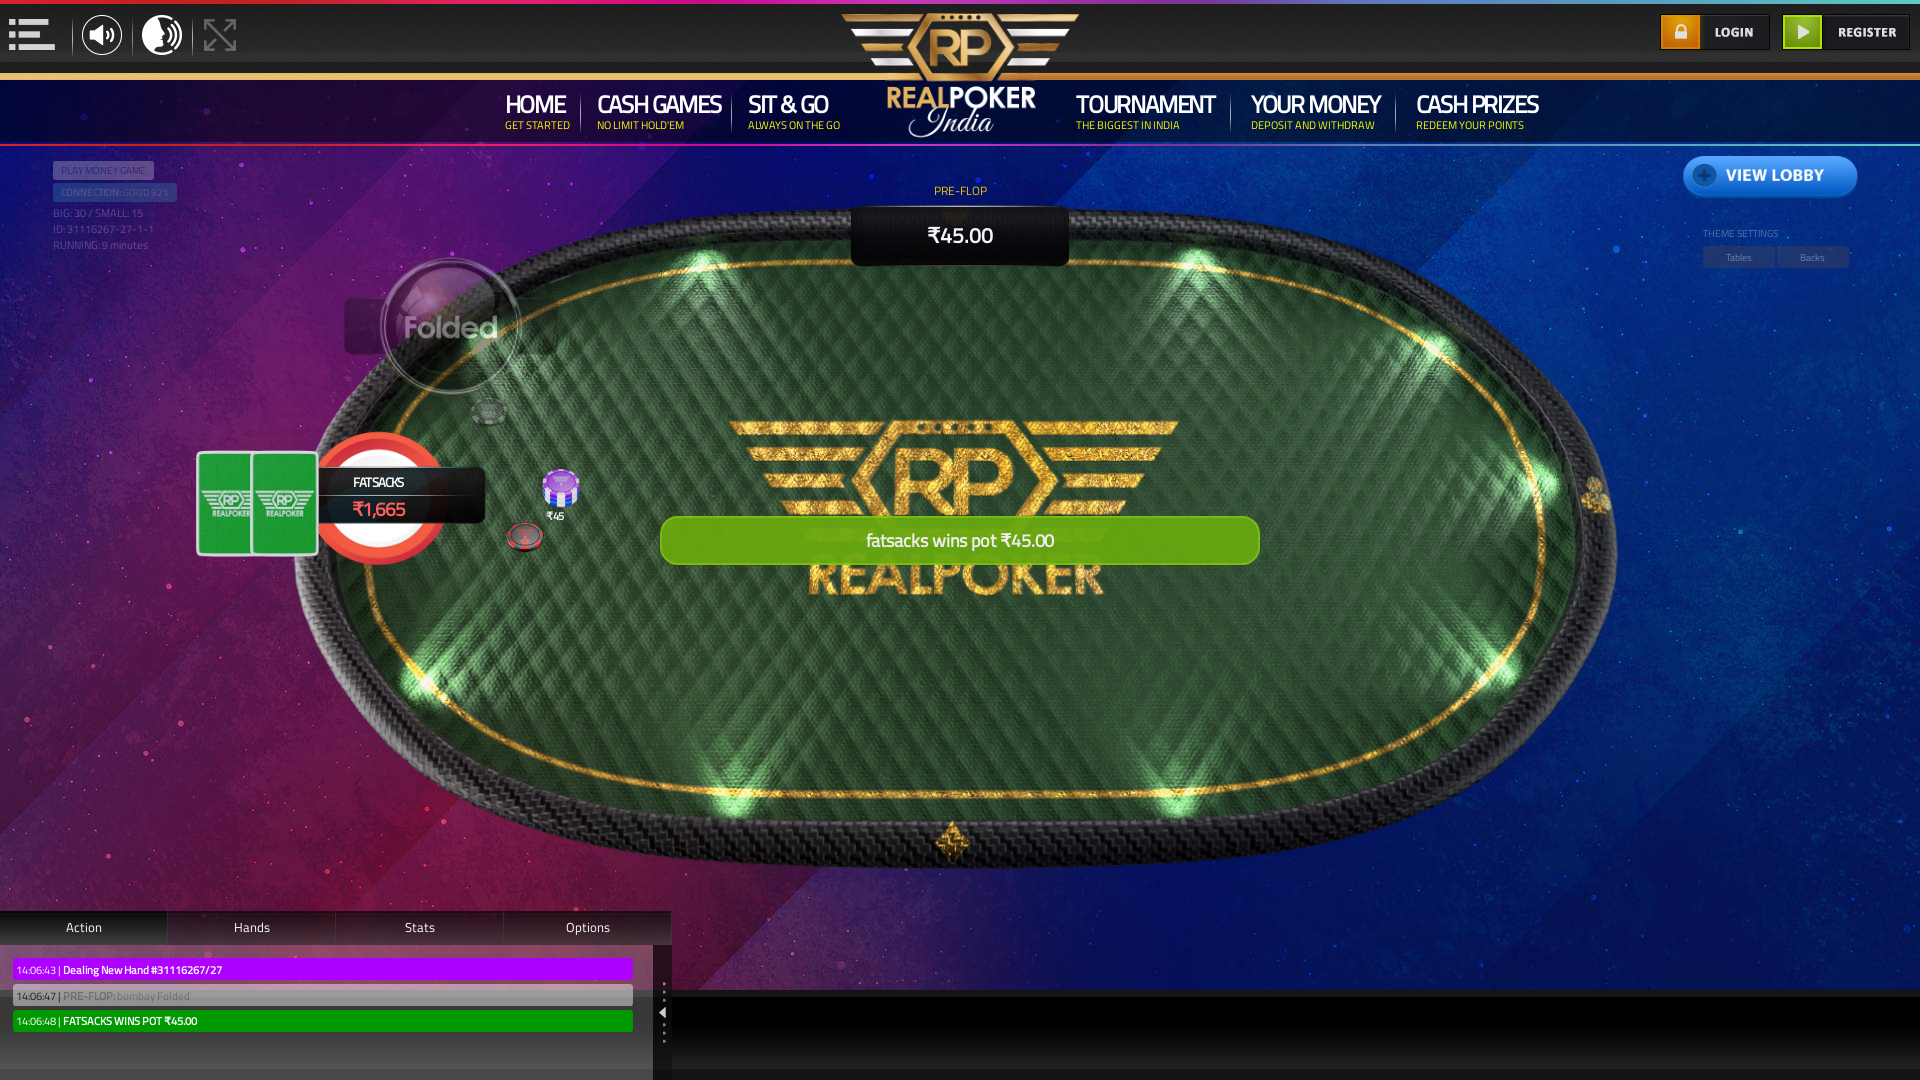 HSR Layout, Bangalore online poker game on a 10 player table in the 9th minute of the game